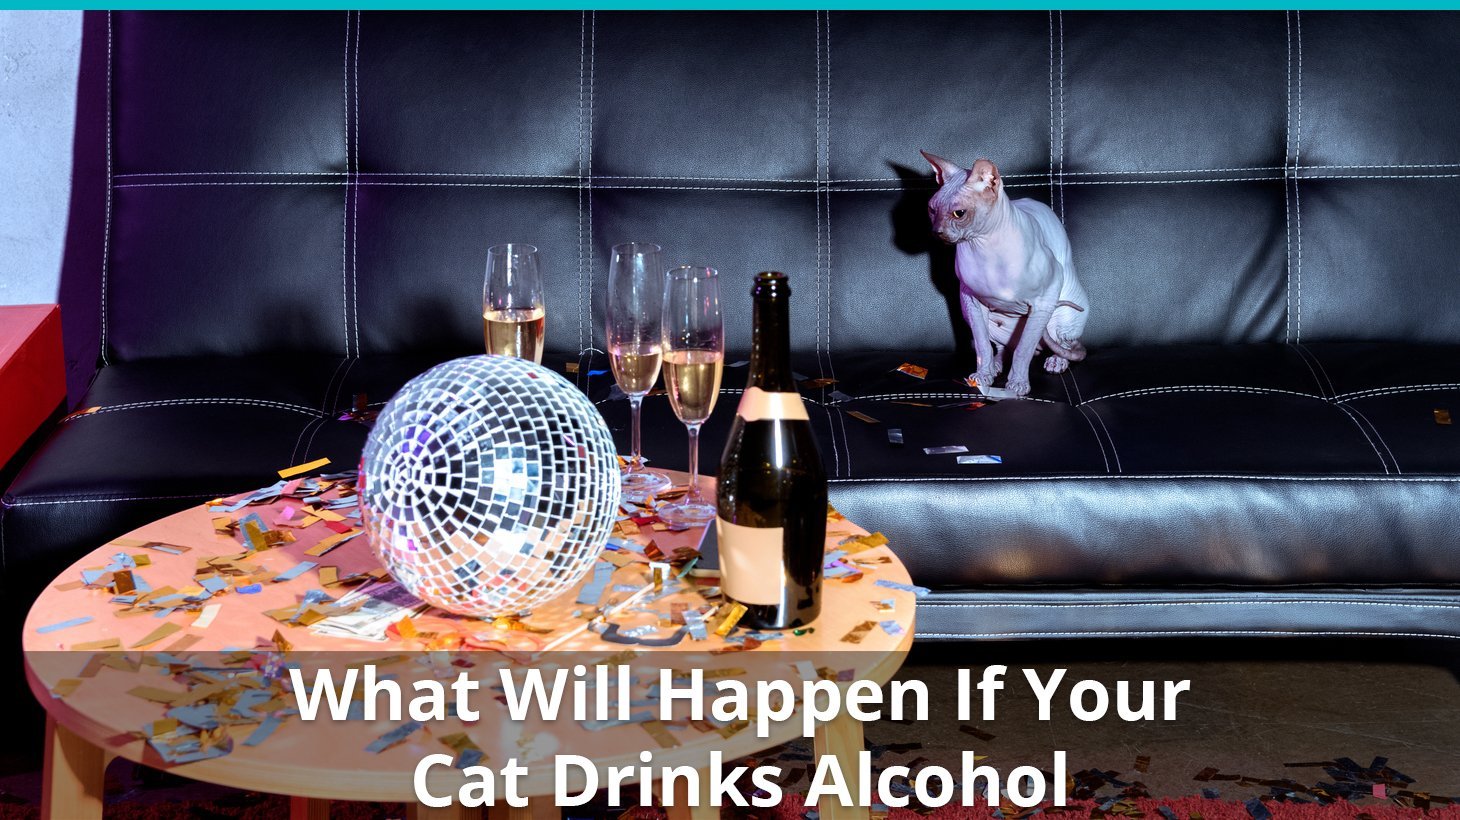 What Happens if Cats Drink Alcohol?